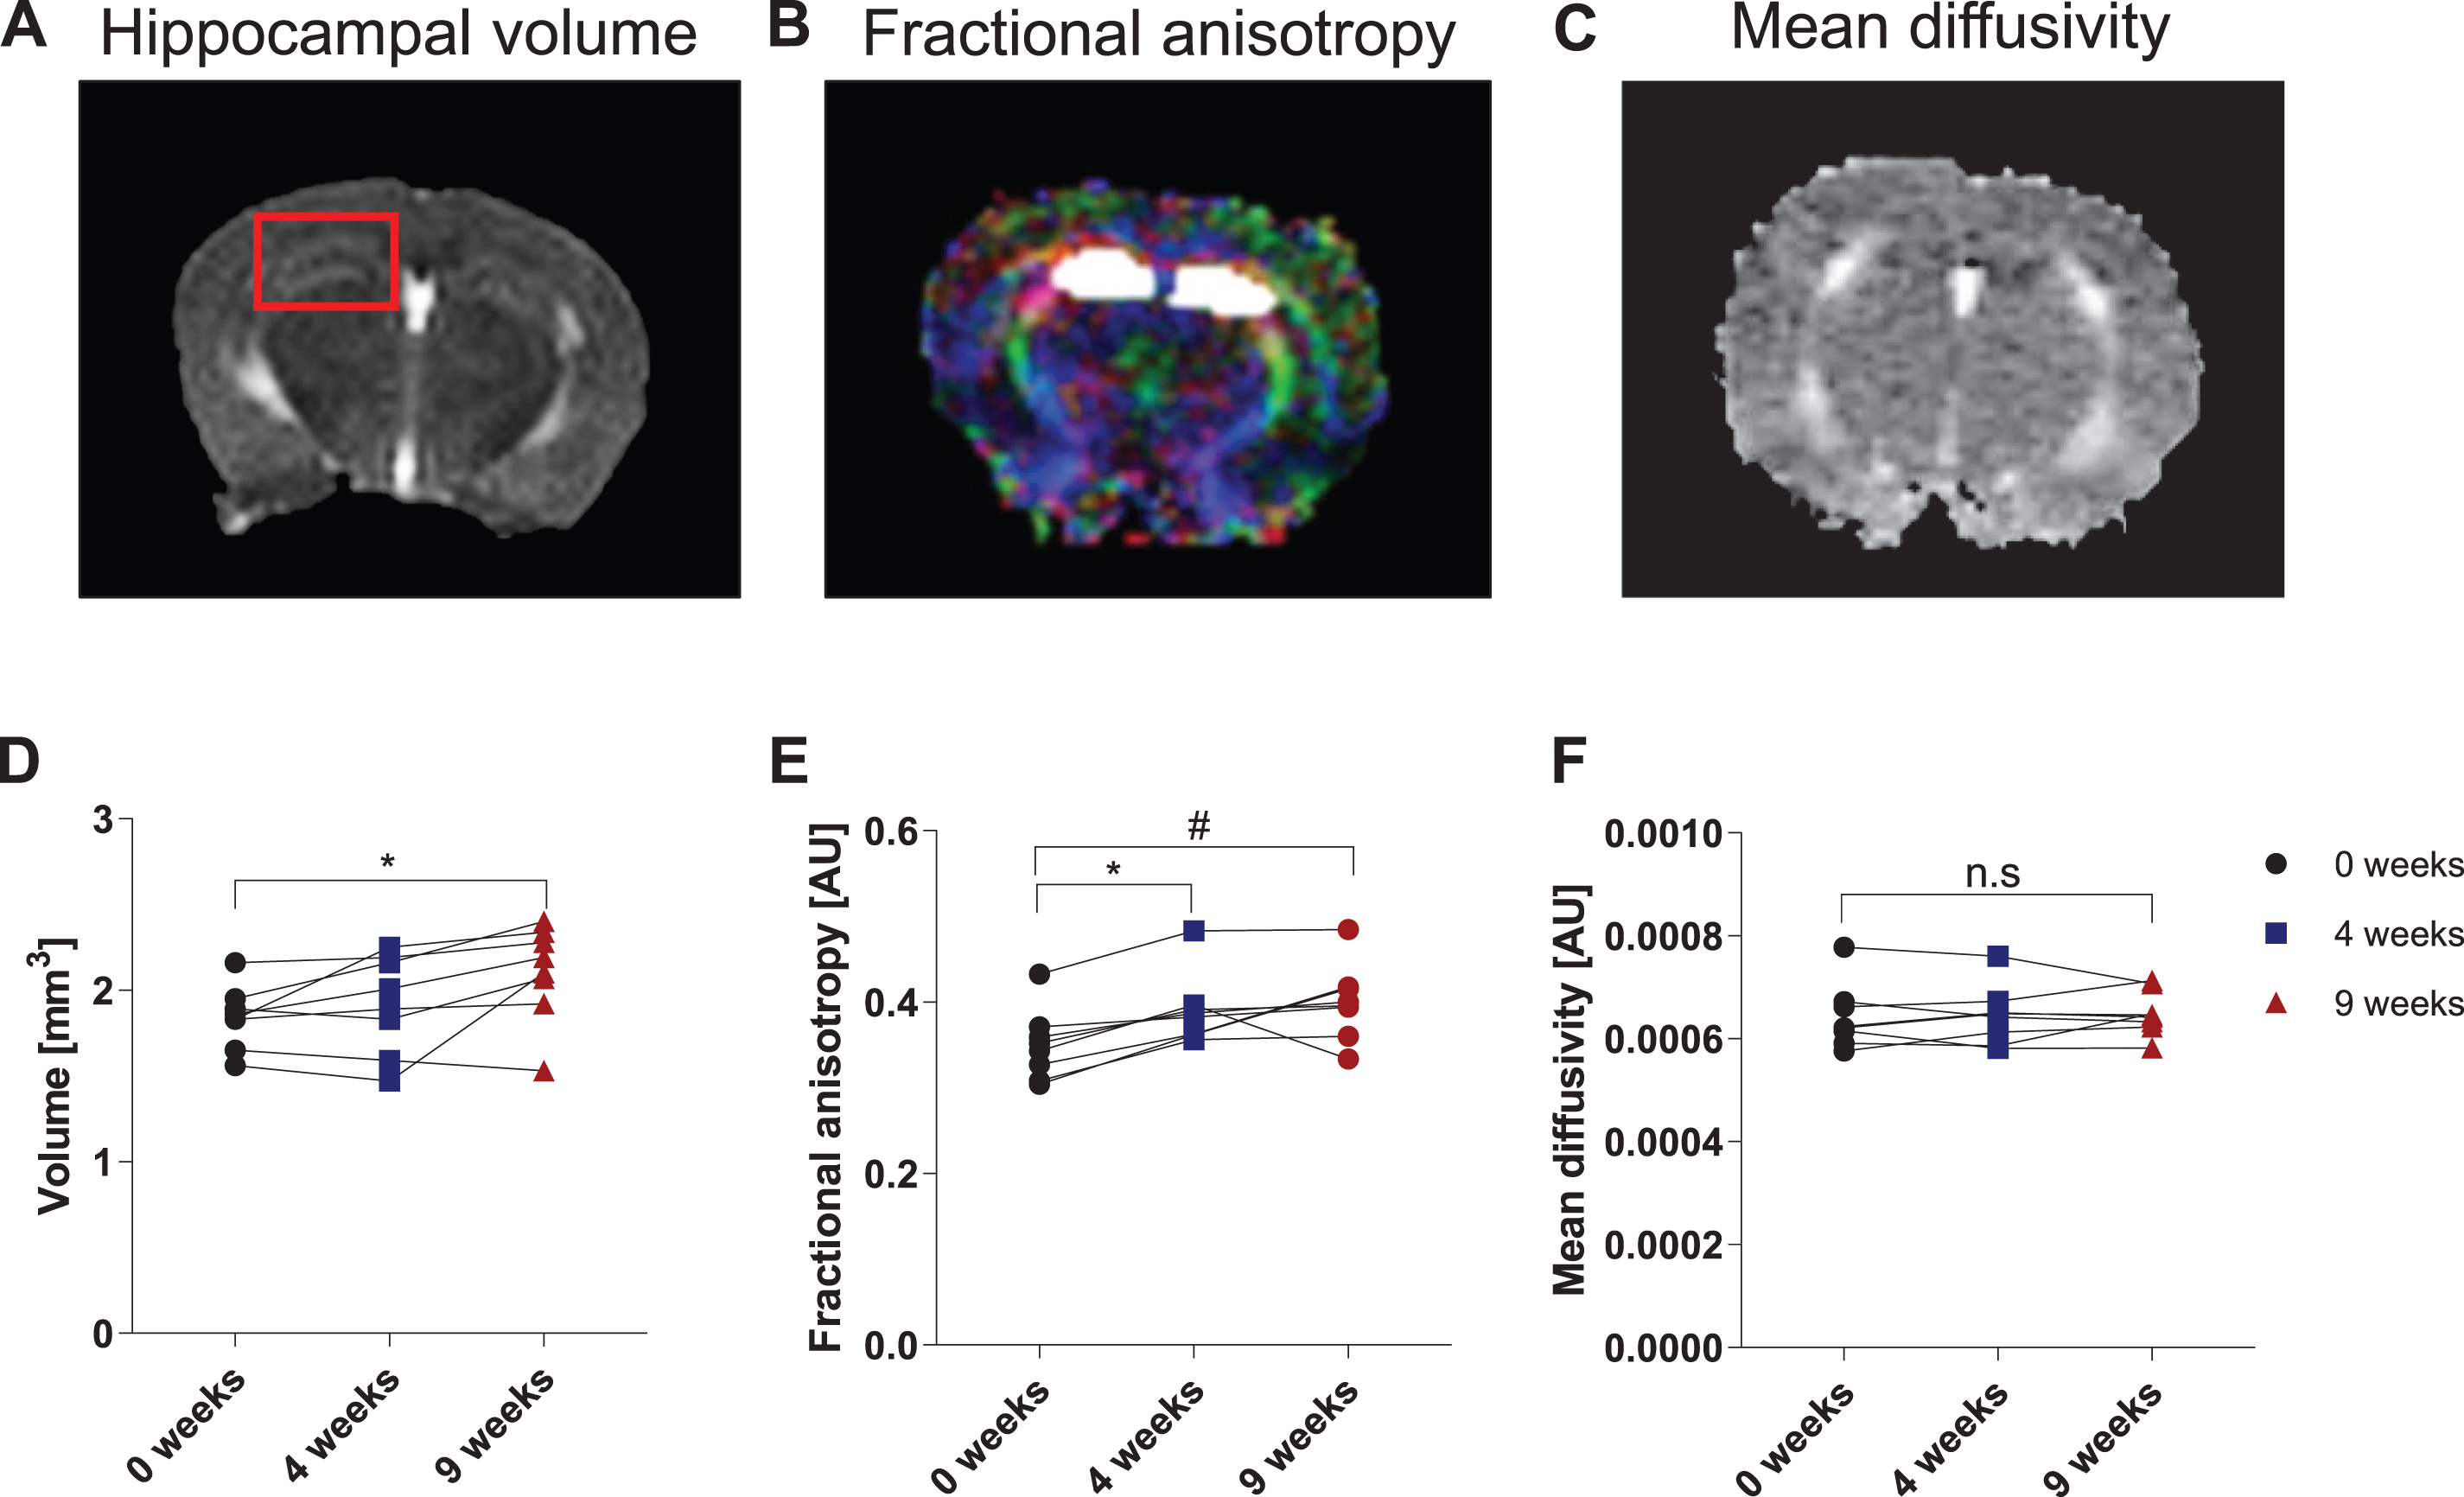 Voluntary running induces changes in hippocampal volume and microstructure as measured by DTI. Representative MRI images of hippocampal volume (A), fractional anisotropy (B), and mean diffusivity (C). The red box in (A) outlines the area of the hippocampal formation. The white area in (B) denotes the region of interest: the hippocampal formation, including CA1, CA2, CA3, and DG. The various colors in (B) represent orientation of the microstructure in space: red is lateral (from left to right), green is superior to inferior, and blue is anterior to posterior. Note the corpus callosum in red is traveling from left to right. (D) Hippocampal volume is shown in mm3. Data are expressed as mean ± SEM. *p < 0.05 using repeated-measures one-way ANOVA. (E) Hippocampal fractional anisotropy (FA) and (F) mean diffusivity (MD) are depicted as arbitrary units (AU). Data are expressed as mean ± SEM. *p < 0.001 and #p < 0.01 are compared to baseline scan at 0 weeks using repeated-measures one-way ANOVA. n.s. = not significant, p > 0.05.